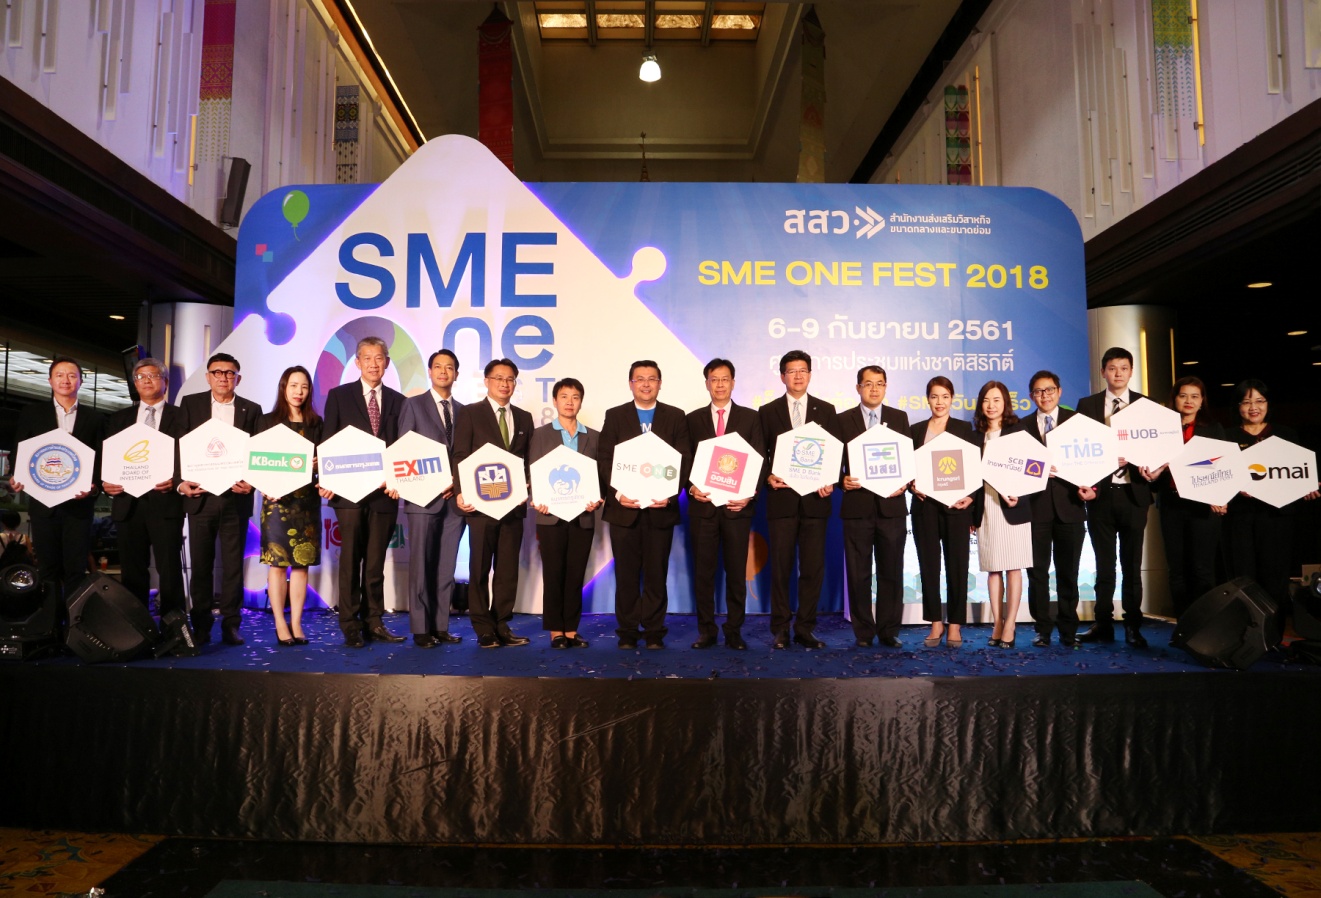 EXIM Thailand Joins Force with OSMEP and Alliances to Form SME ONE - One Stop Service Web Portal